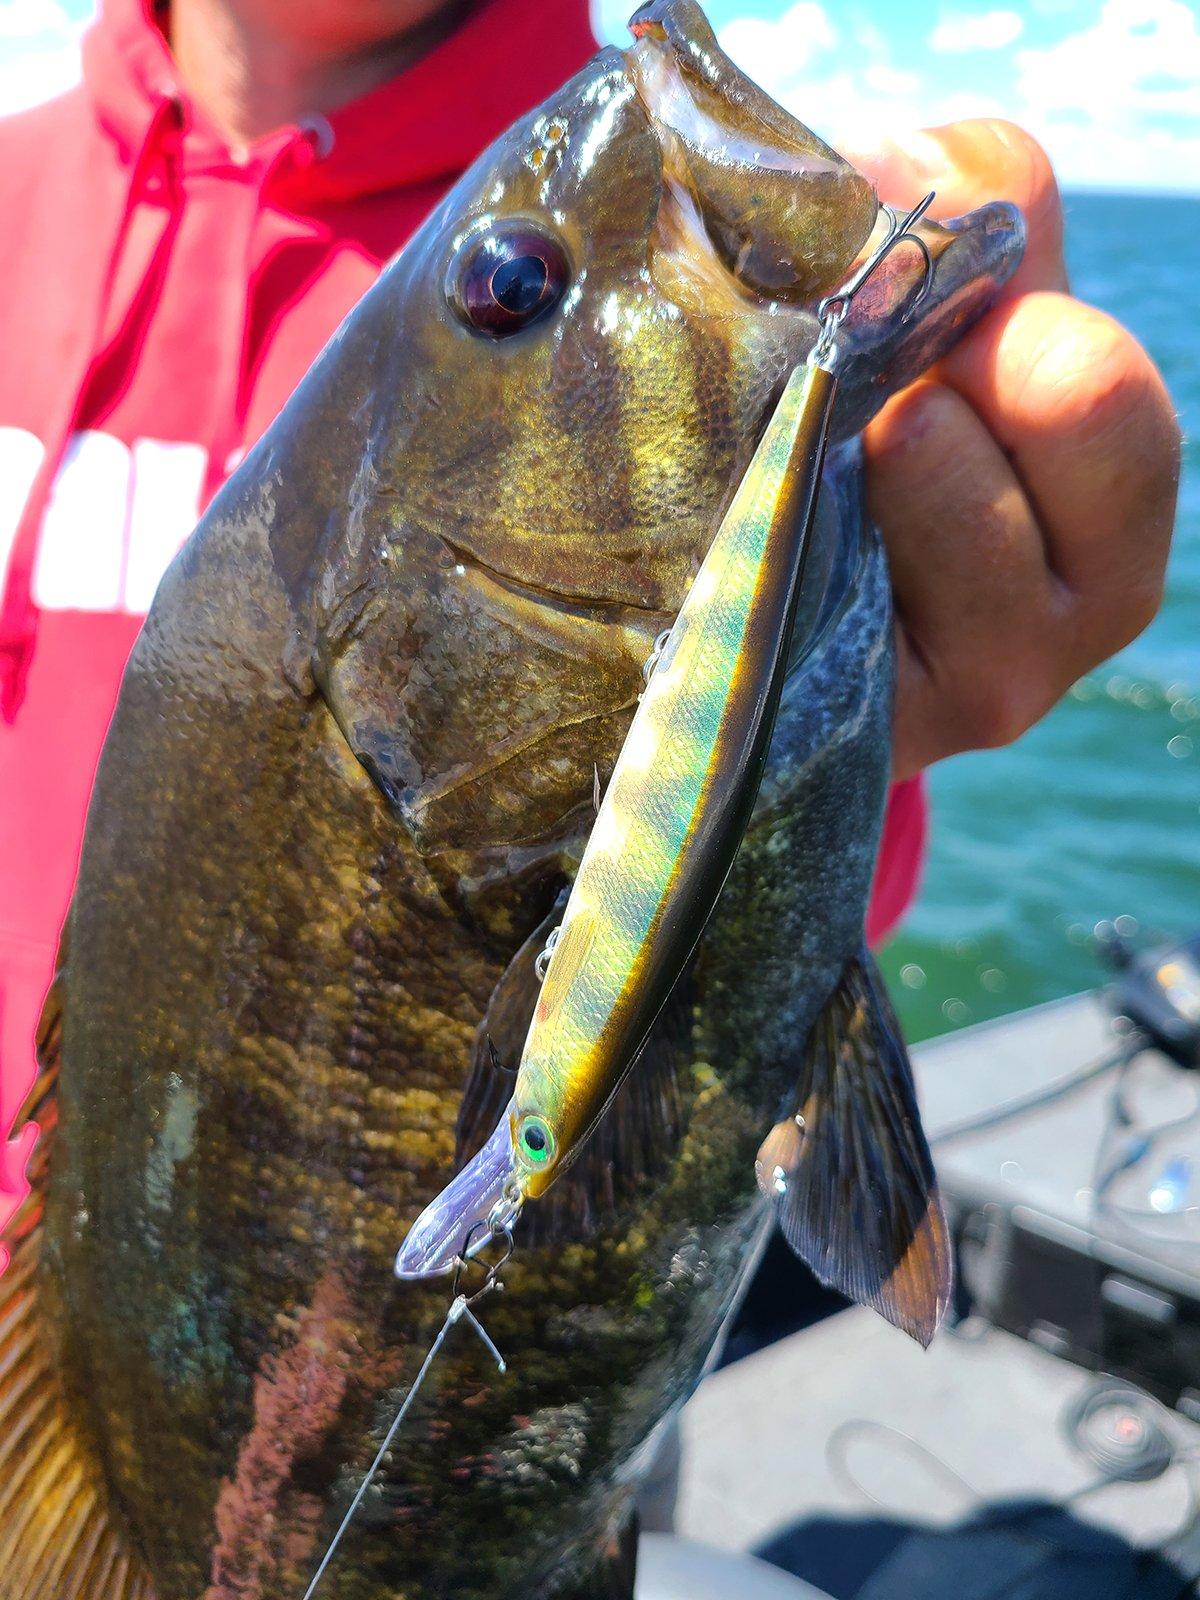 A nice bass is the reward for your fall fishing efforts. Image by Rapala